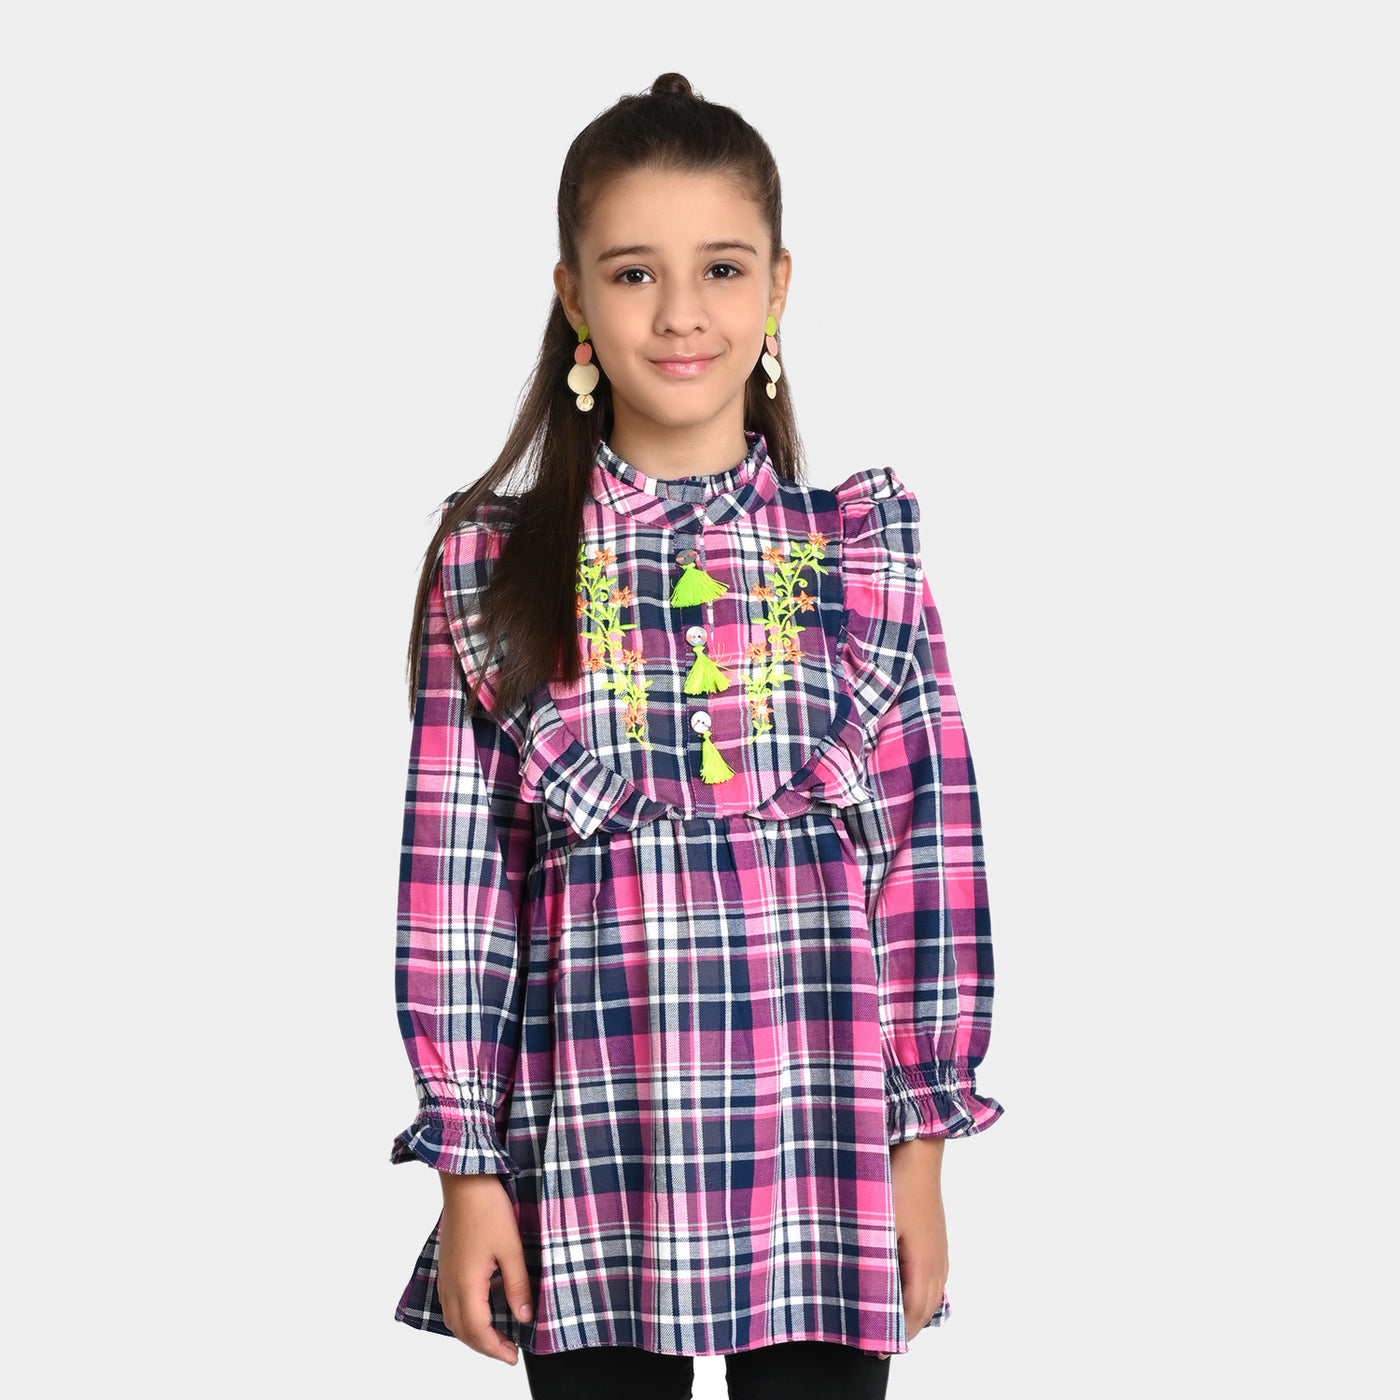 Girls Yarn Embroidered Top Shoq Case-Pink Check